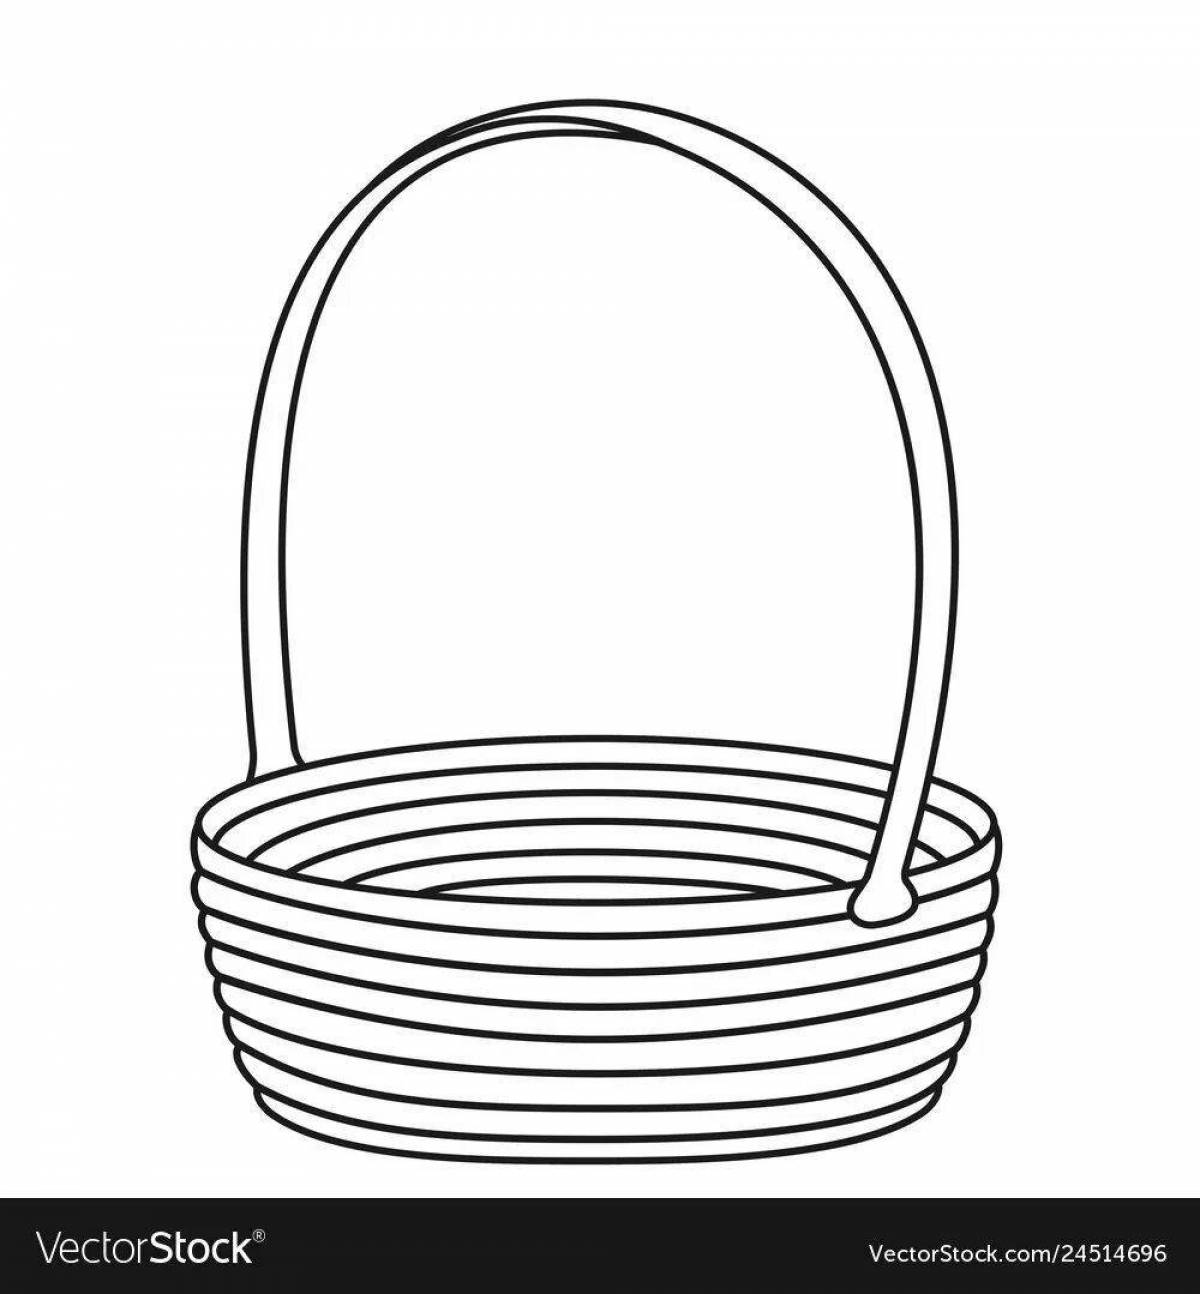 Empty basket color-frenzy coloring pages for kids